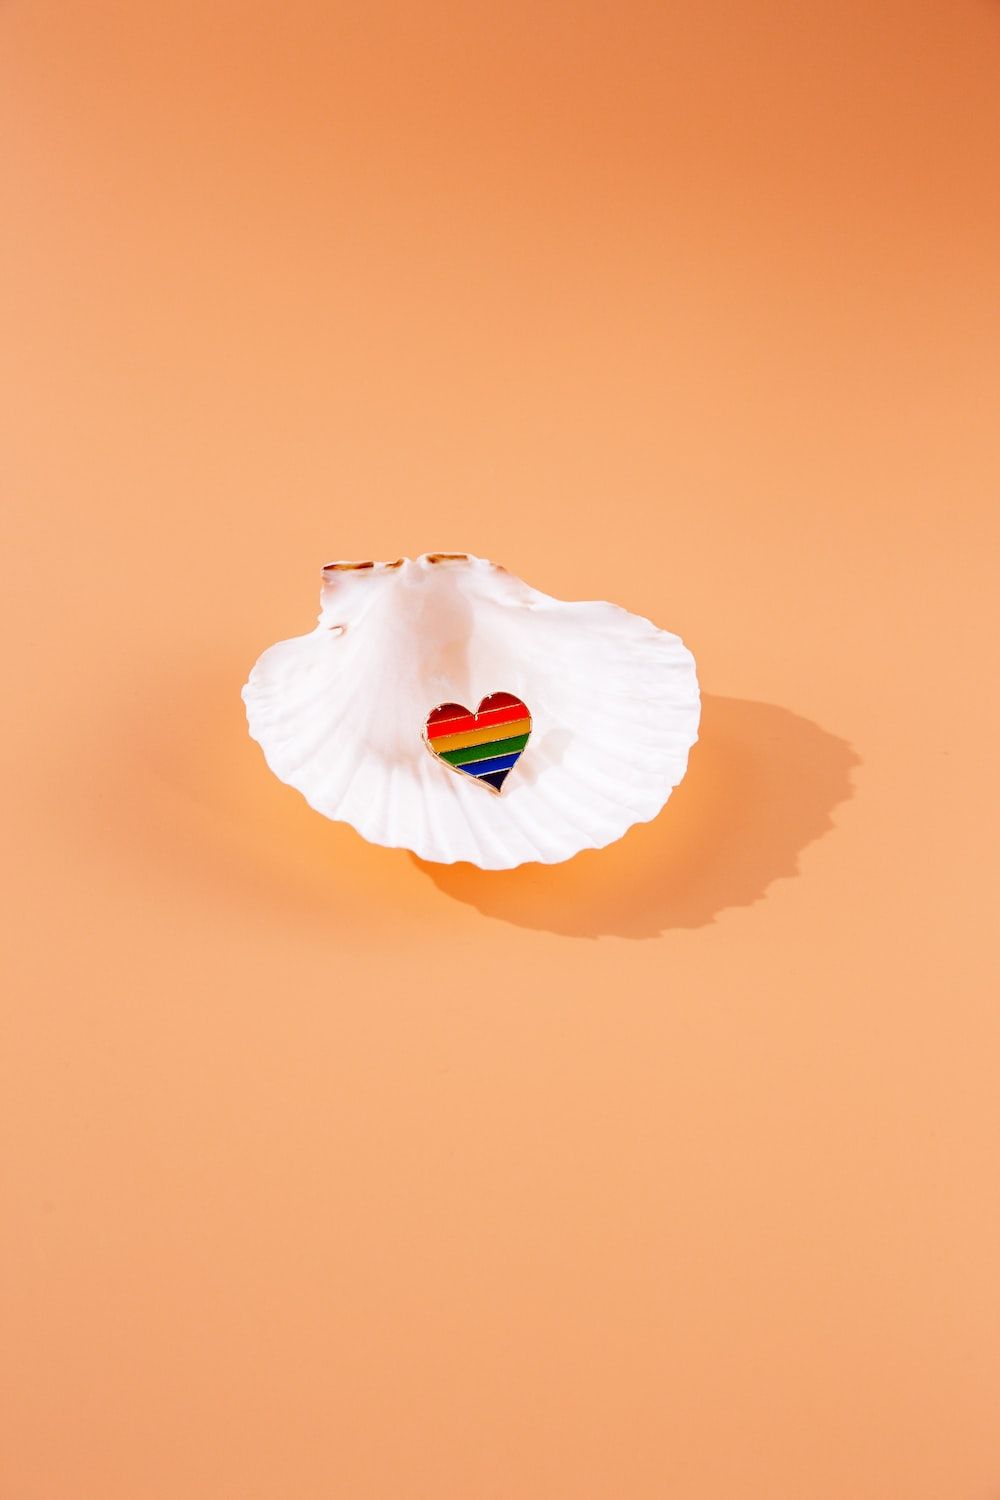 A shell with an image of the rainbow flag on it - Pastel orange